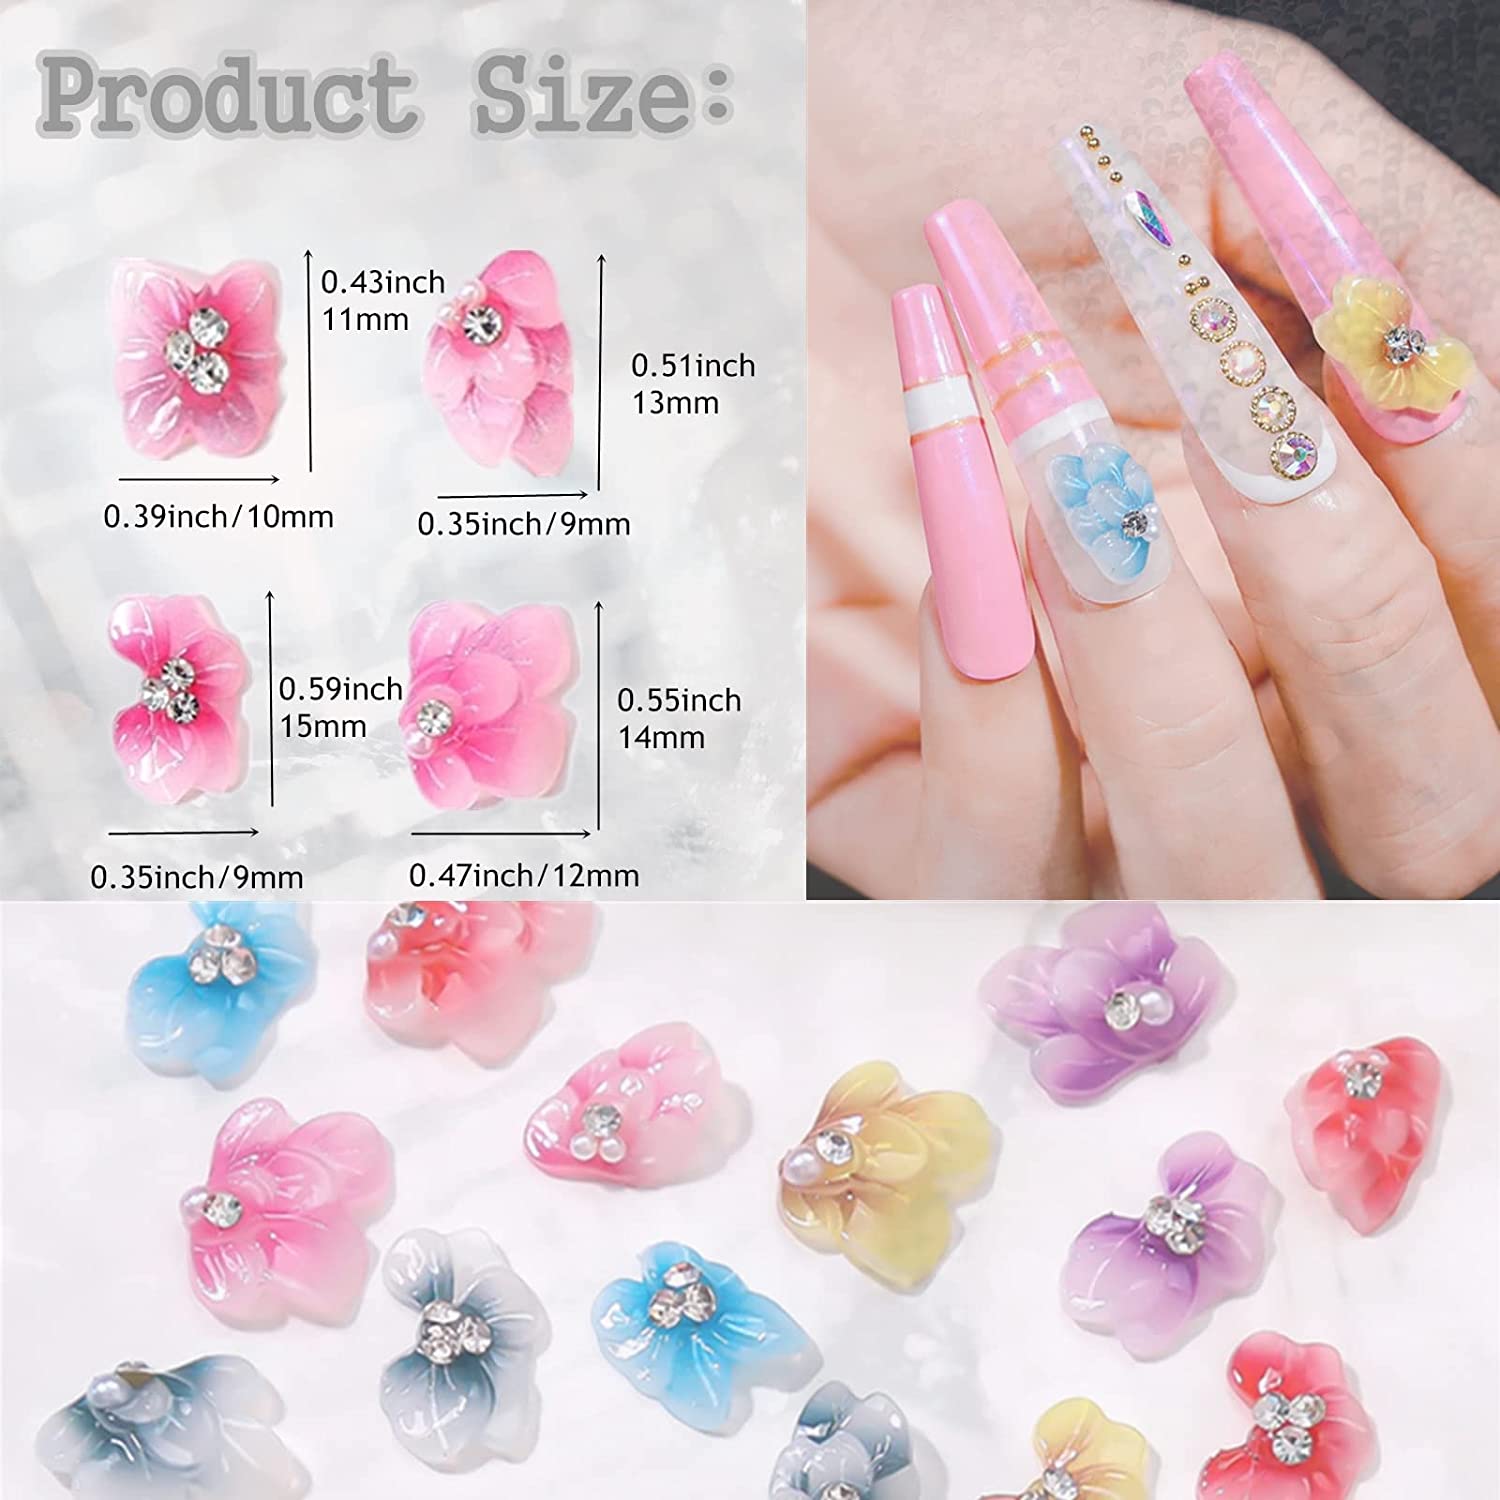 Best Deal for 10Pcs 3D Shiny Alloy Flower Nail Charms Luxury Nail